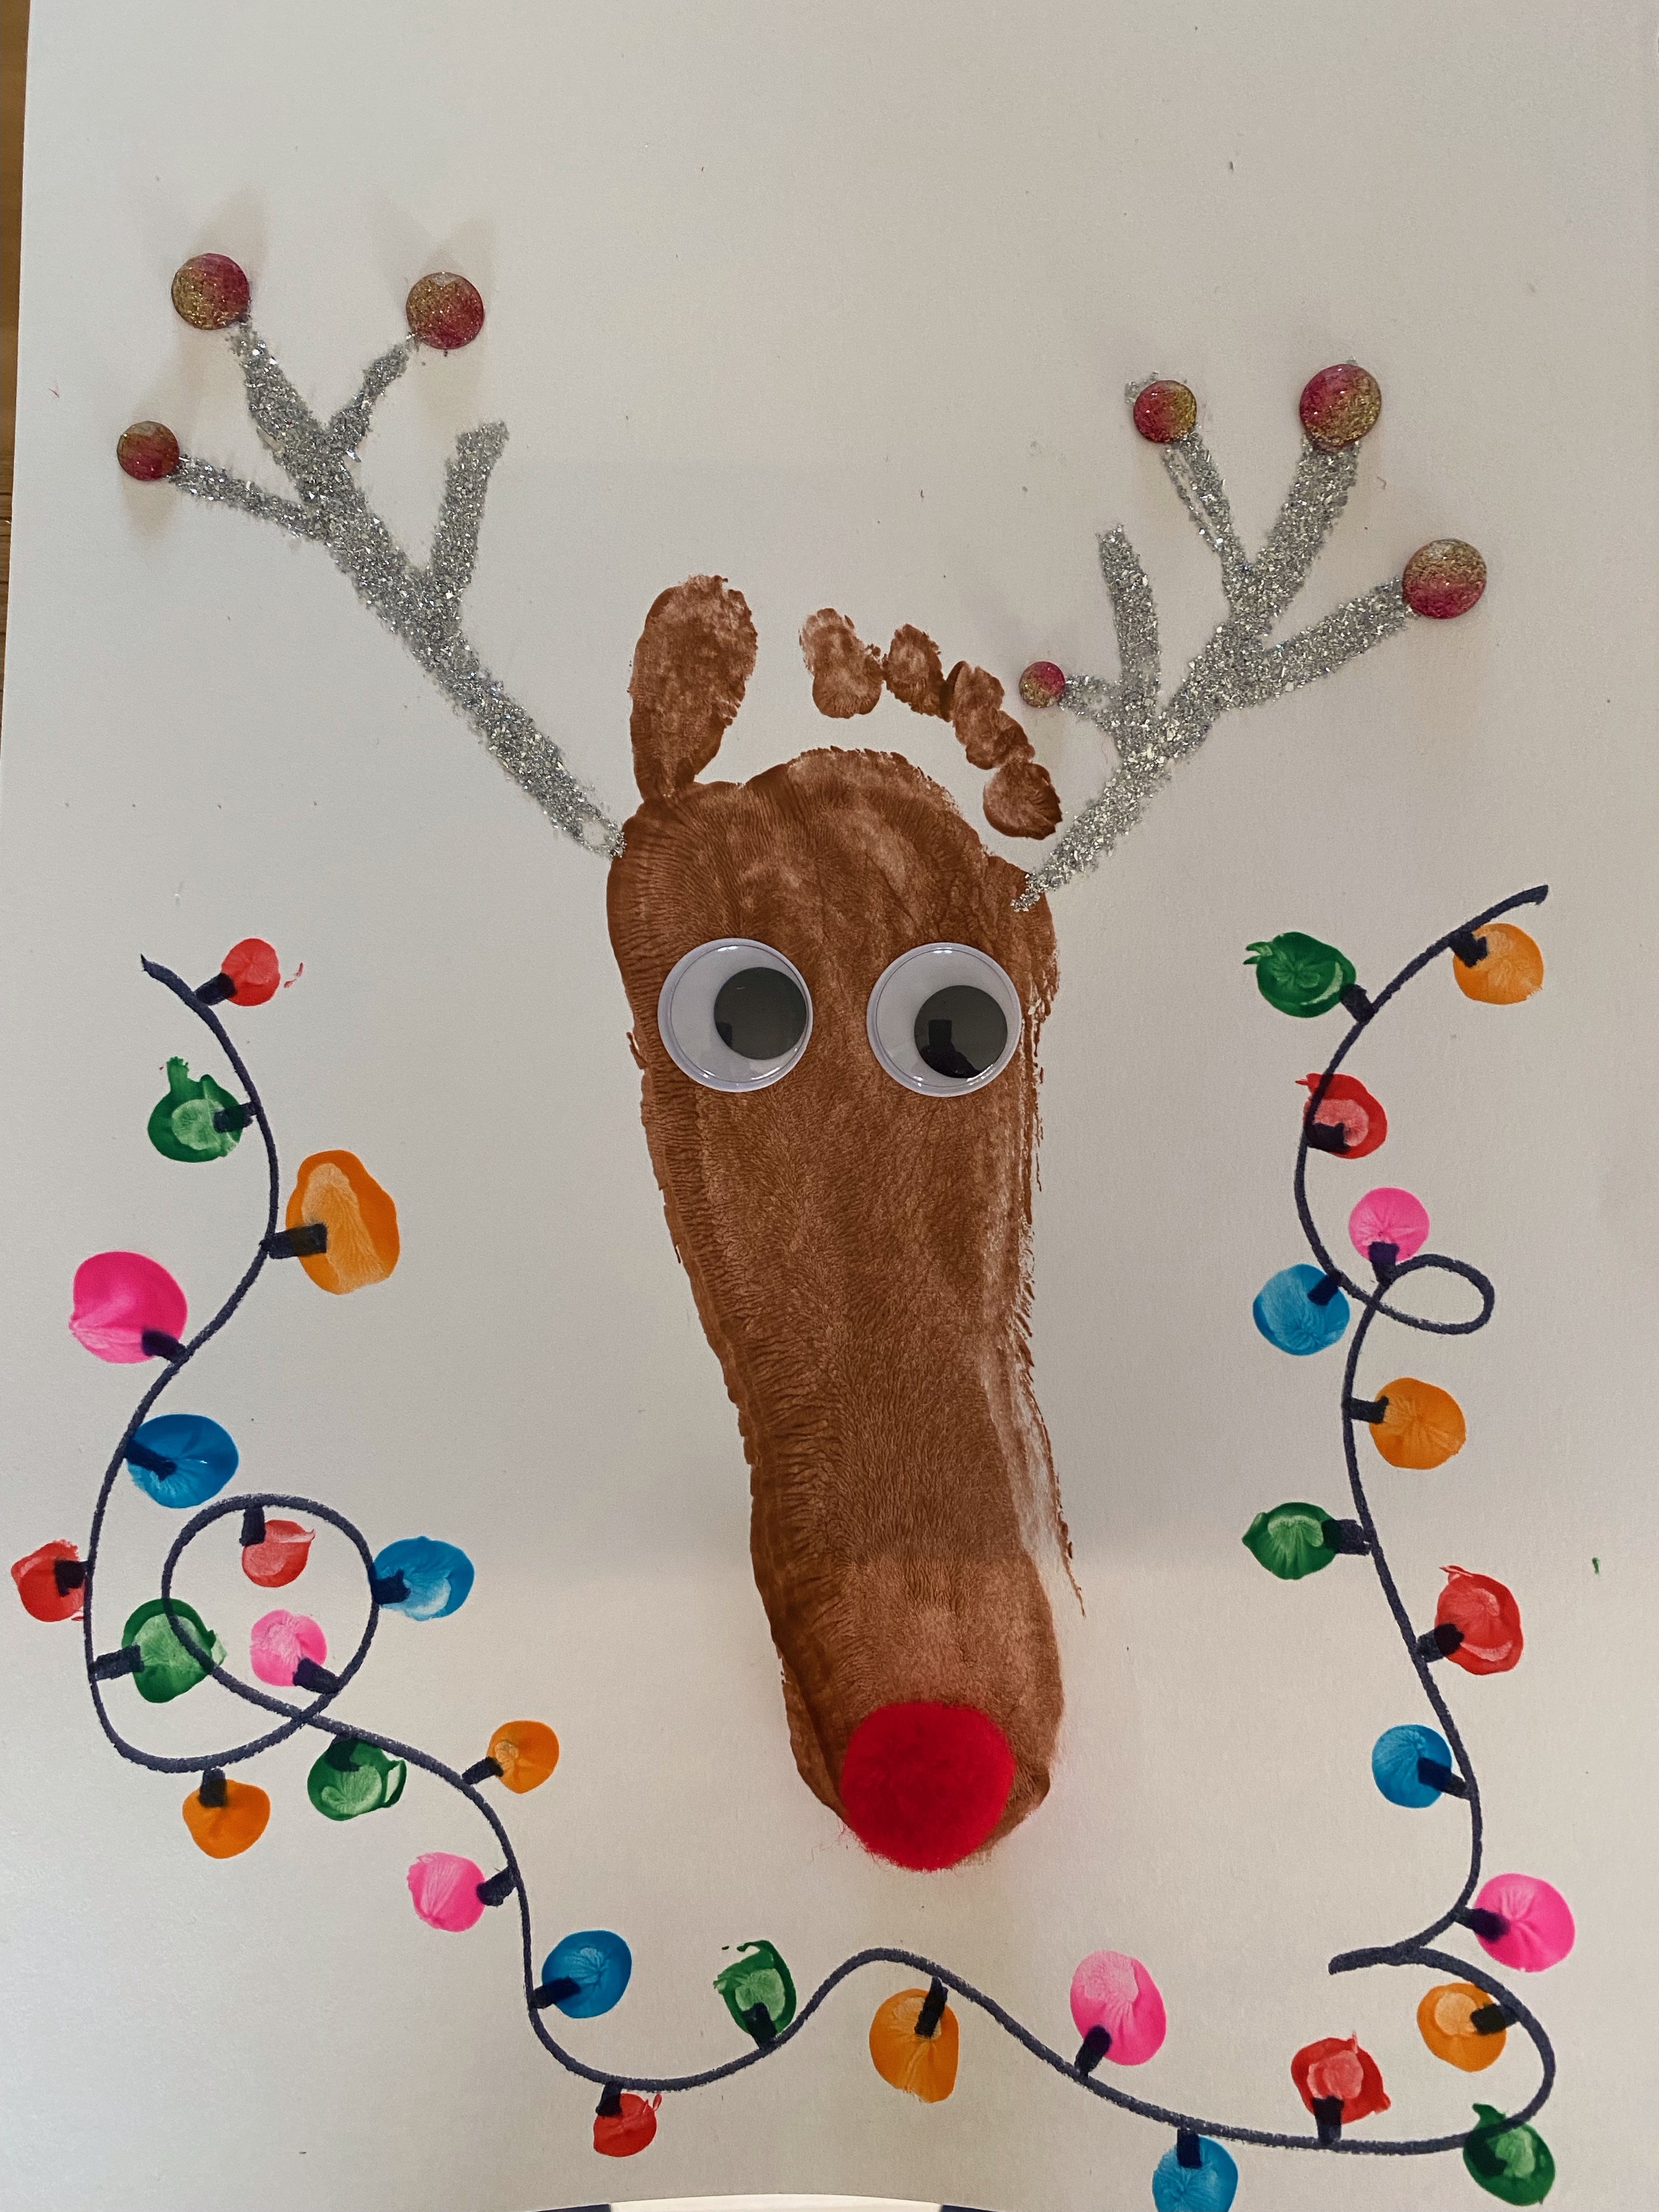 Chloe Ramhit's Christmas card entry. It features a reindeer made from a footprint.